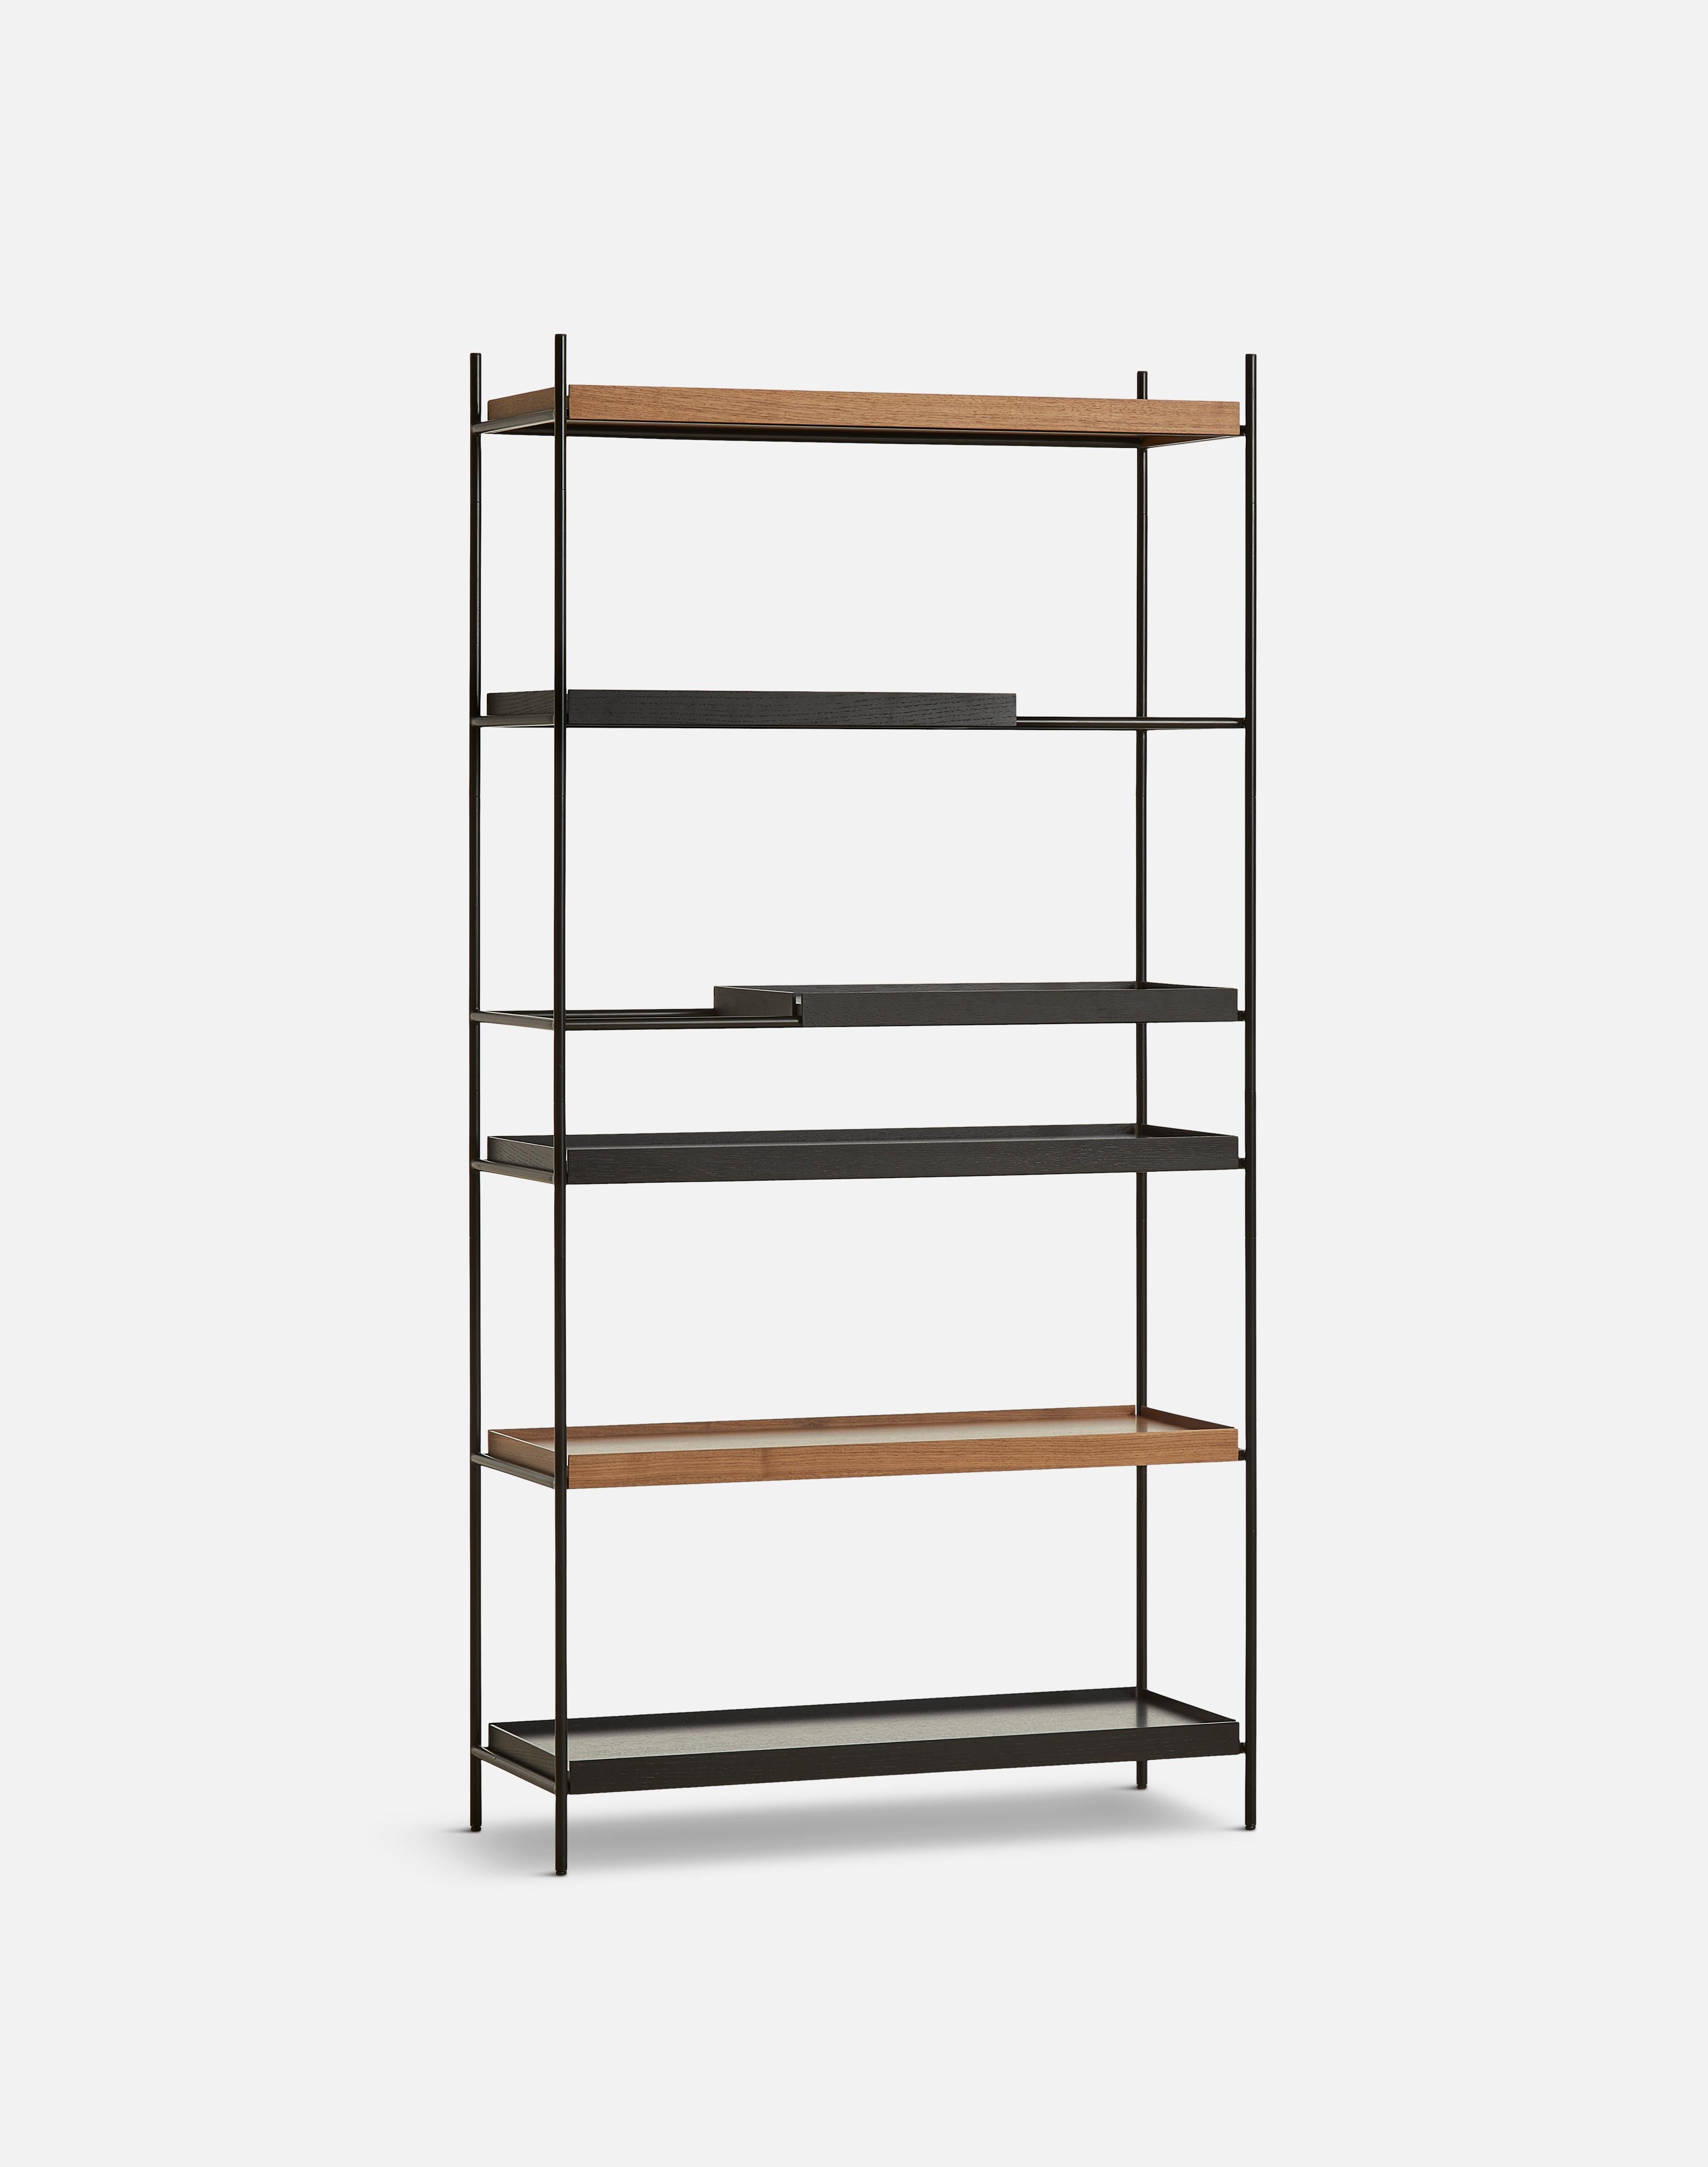 High walnut and black tray shelf II by Hanne Willmann.
Materials: metal, walnut.
Dimensions: D 40 x W 100 x H 201 cm.
Also available in different tray conbinations and 2 sizes: H81, H 201 cm.

Hanne Willmann is a dynamic German designer with